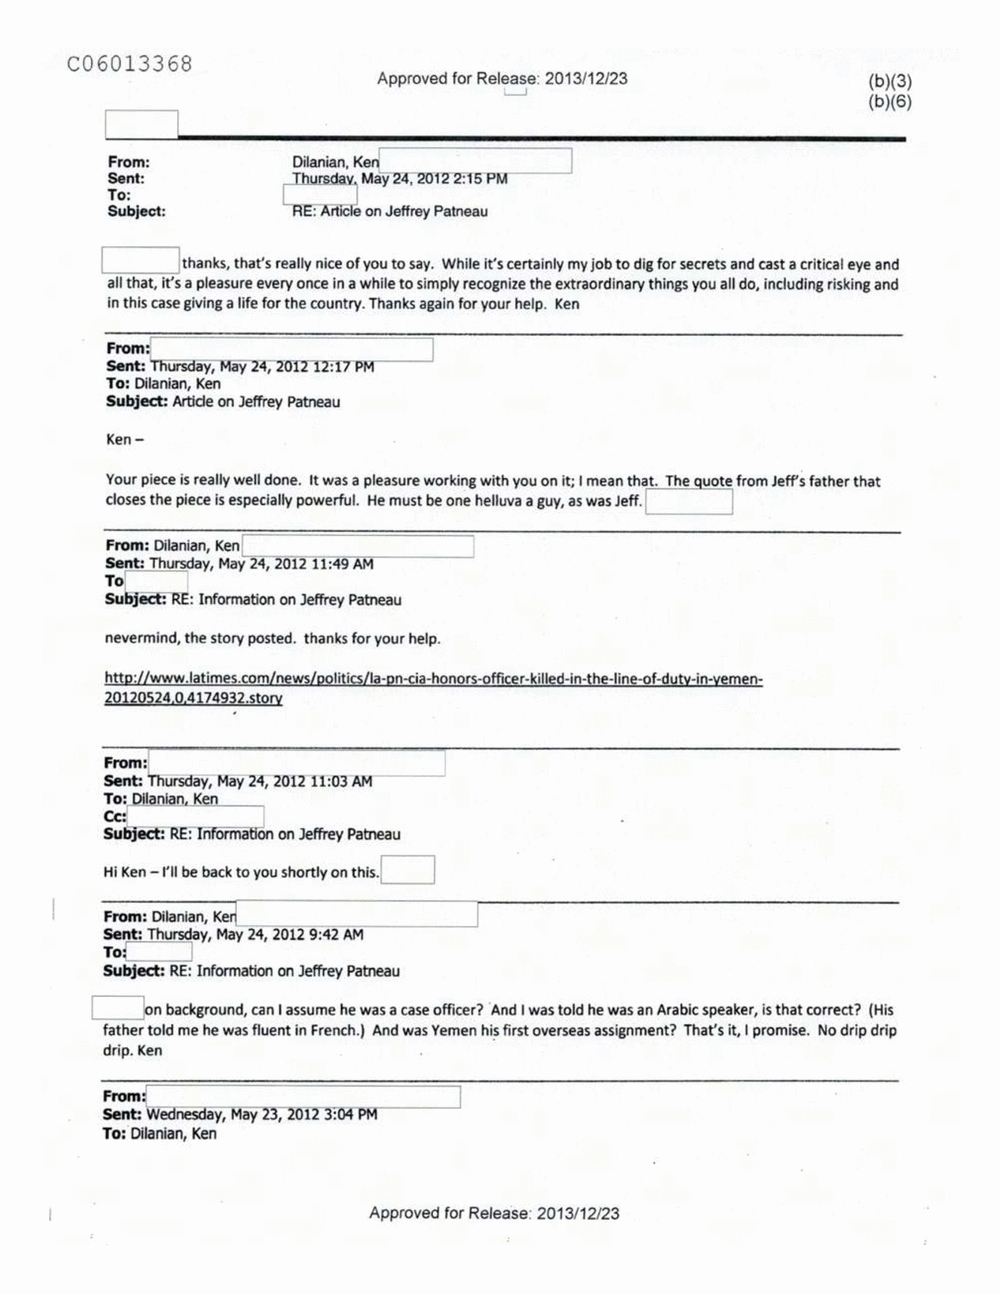 Page 292 from Email Correspondence Between Reporters and CIA Flacks